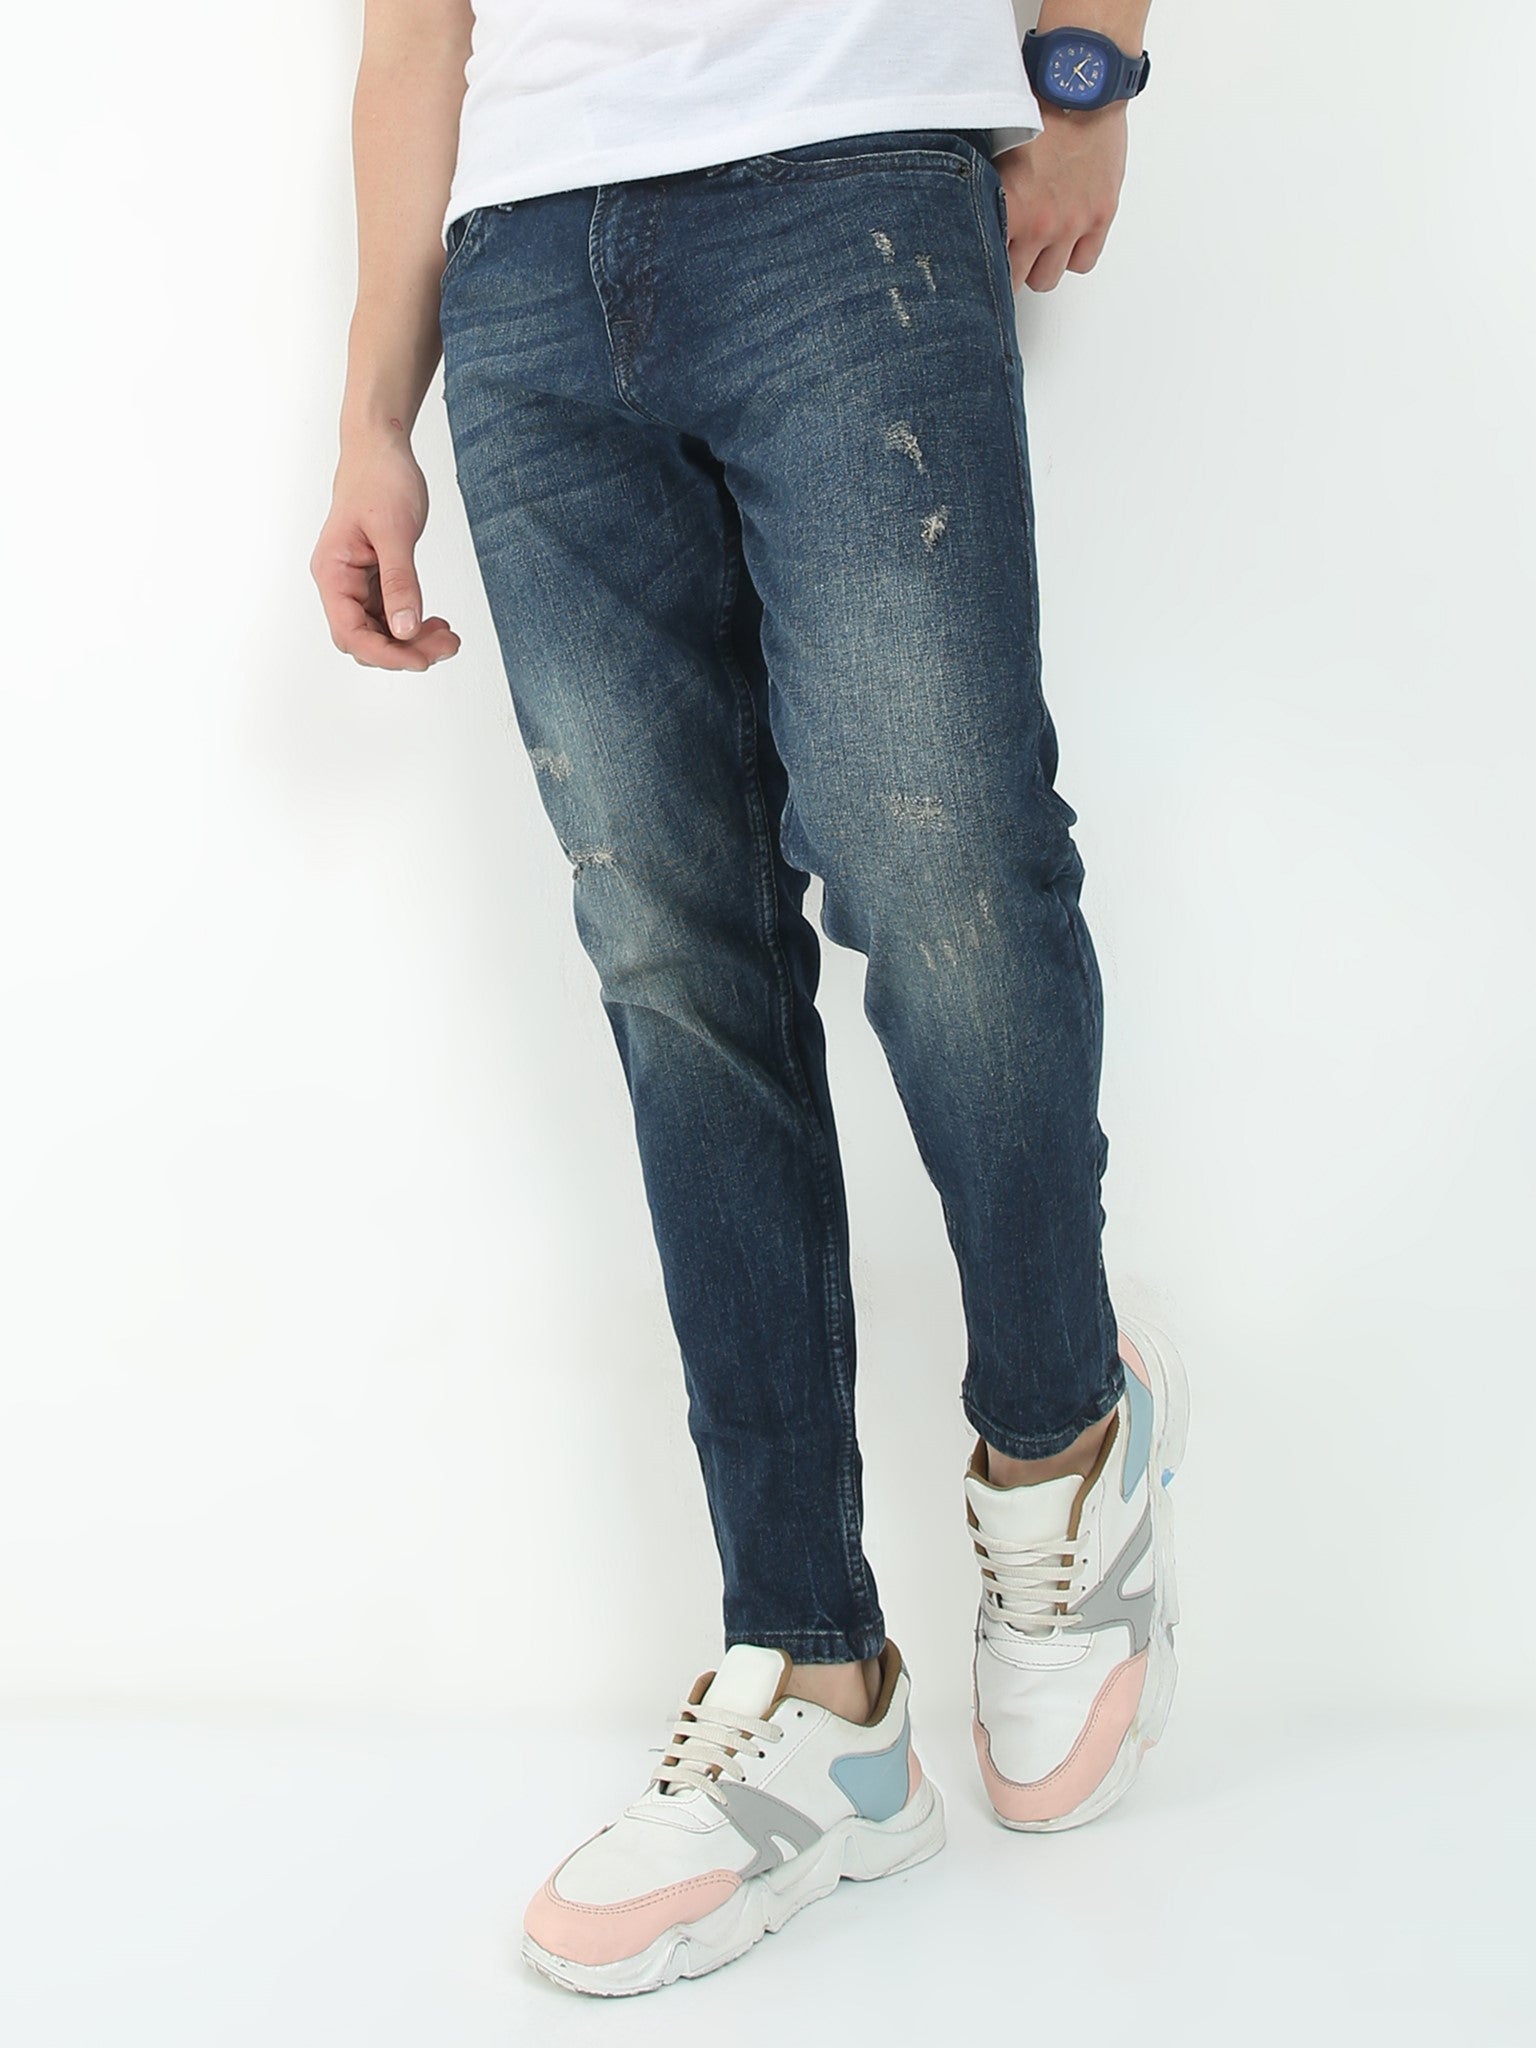 Commodore Blue Skinny Jeans for Men 